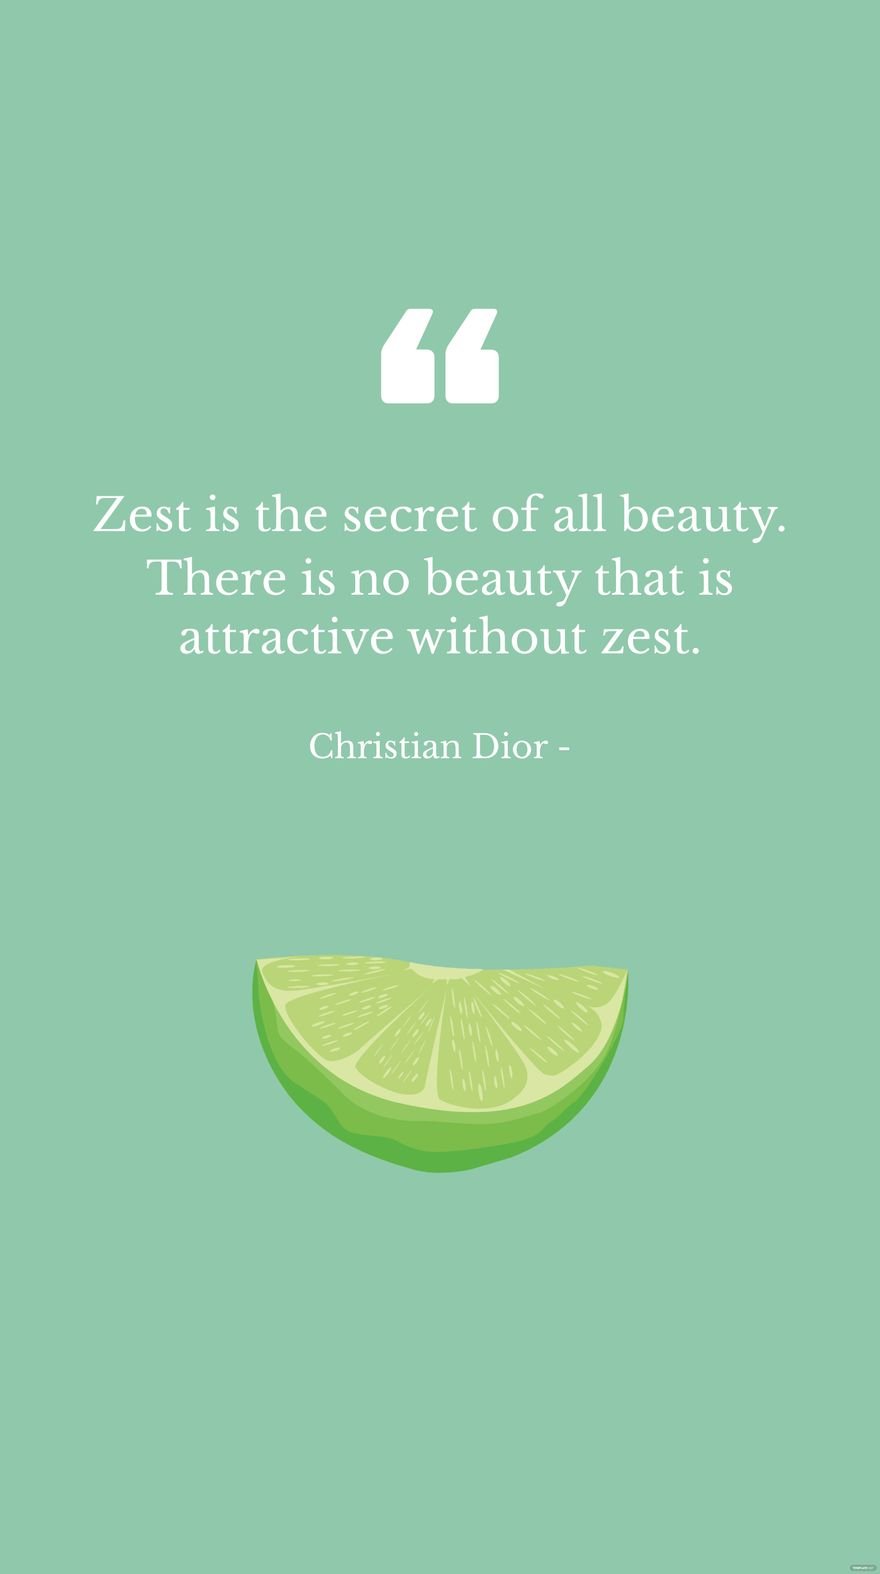 Free Christian Dior - Zest is the secret of all beauty. There is no beauty that is attractive without zest.